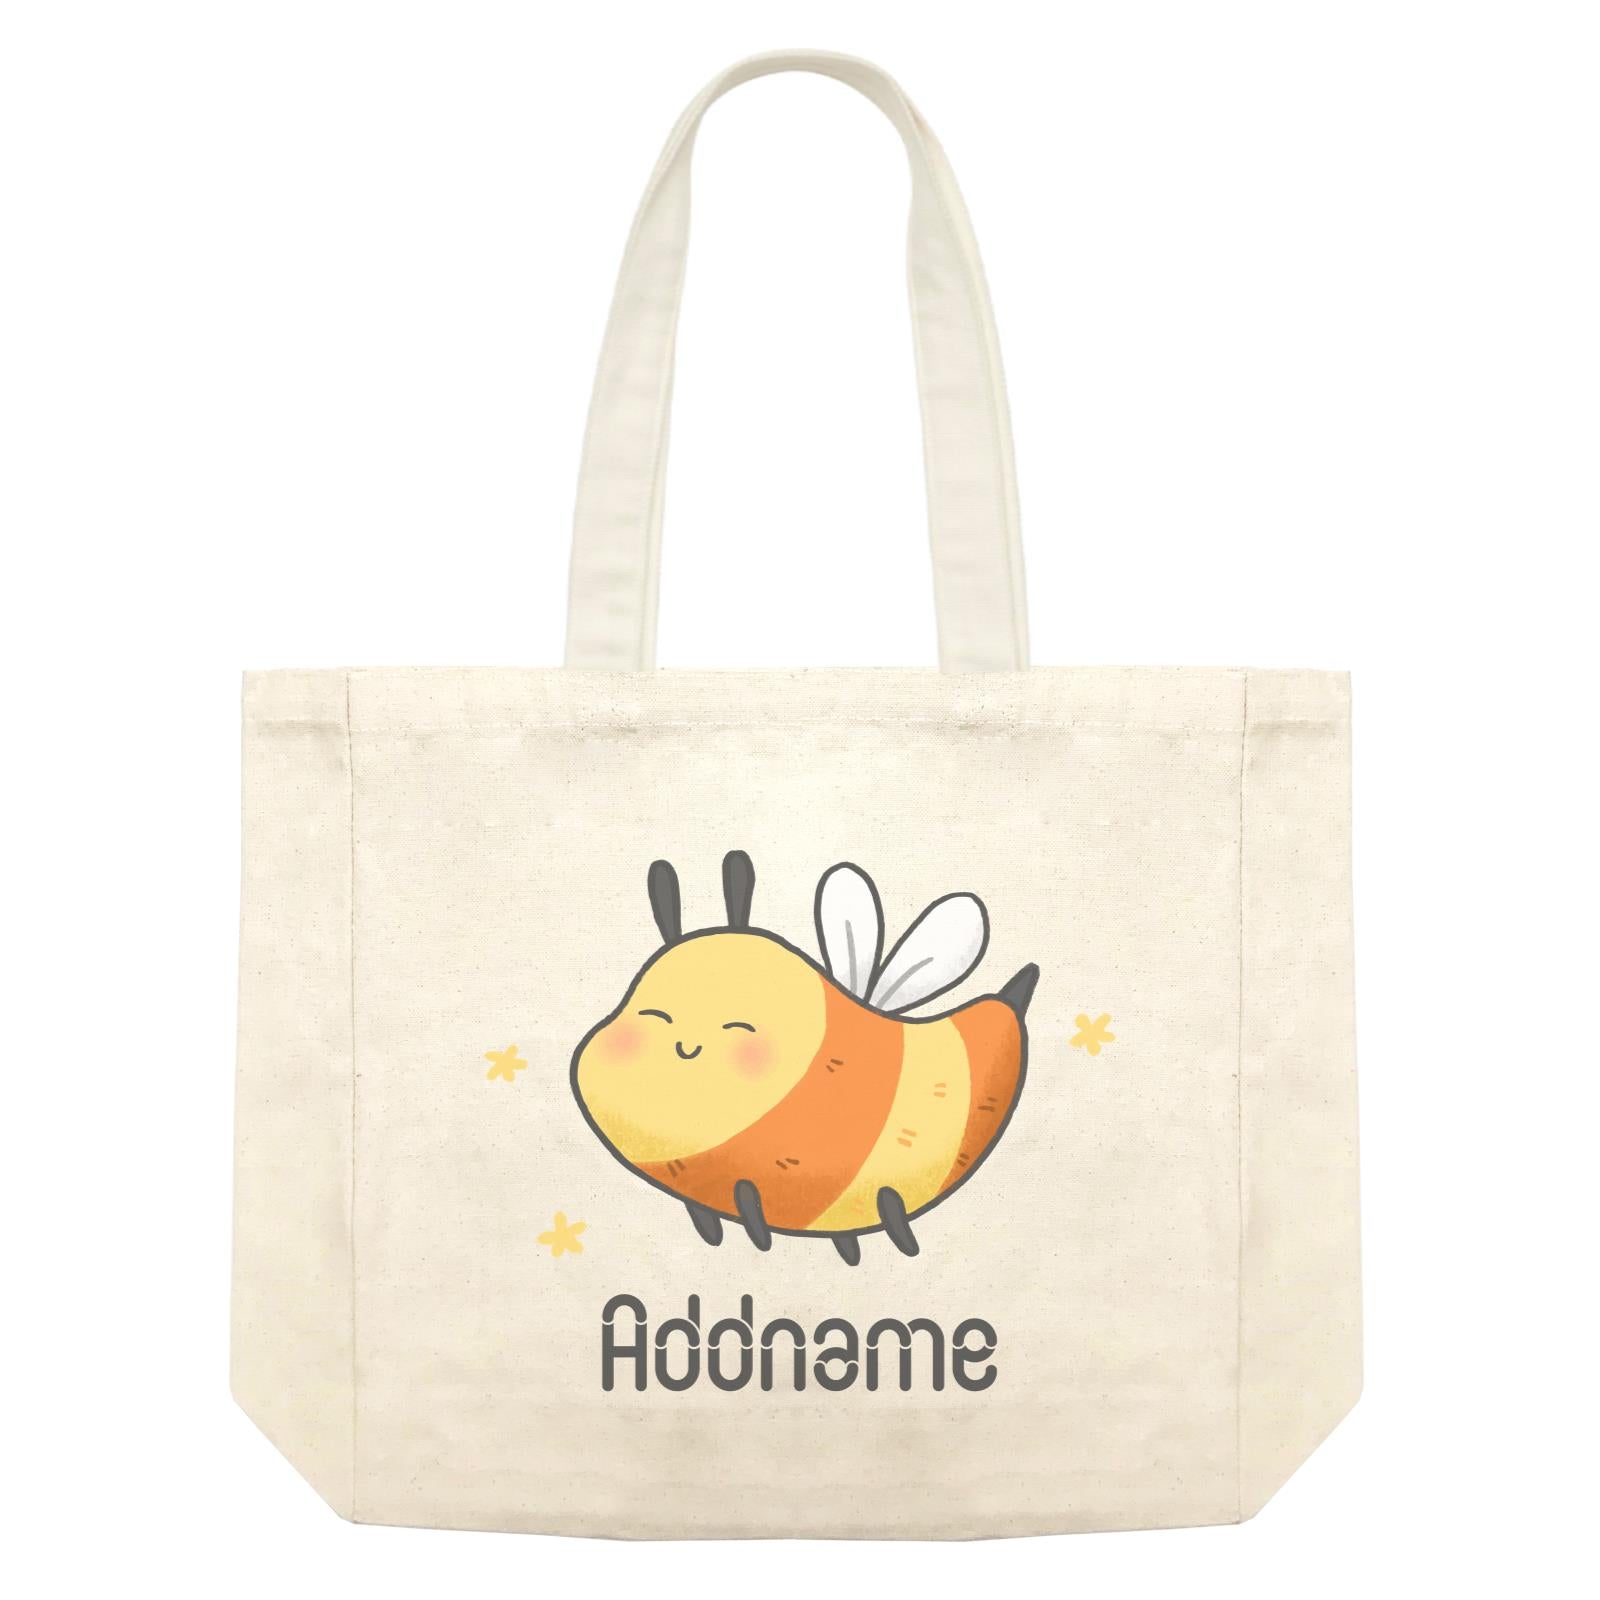 Cute Hand Drawn Style Bee Addname Shopping Bag